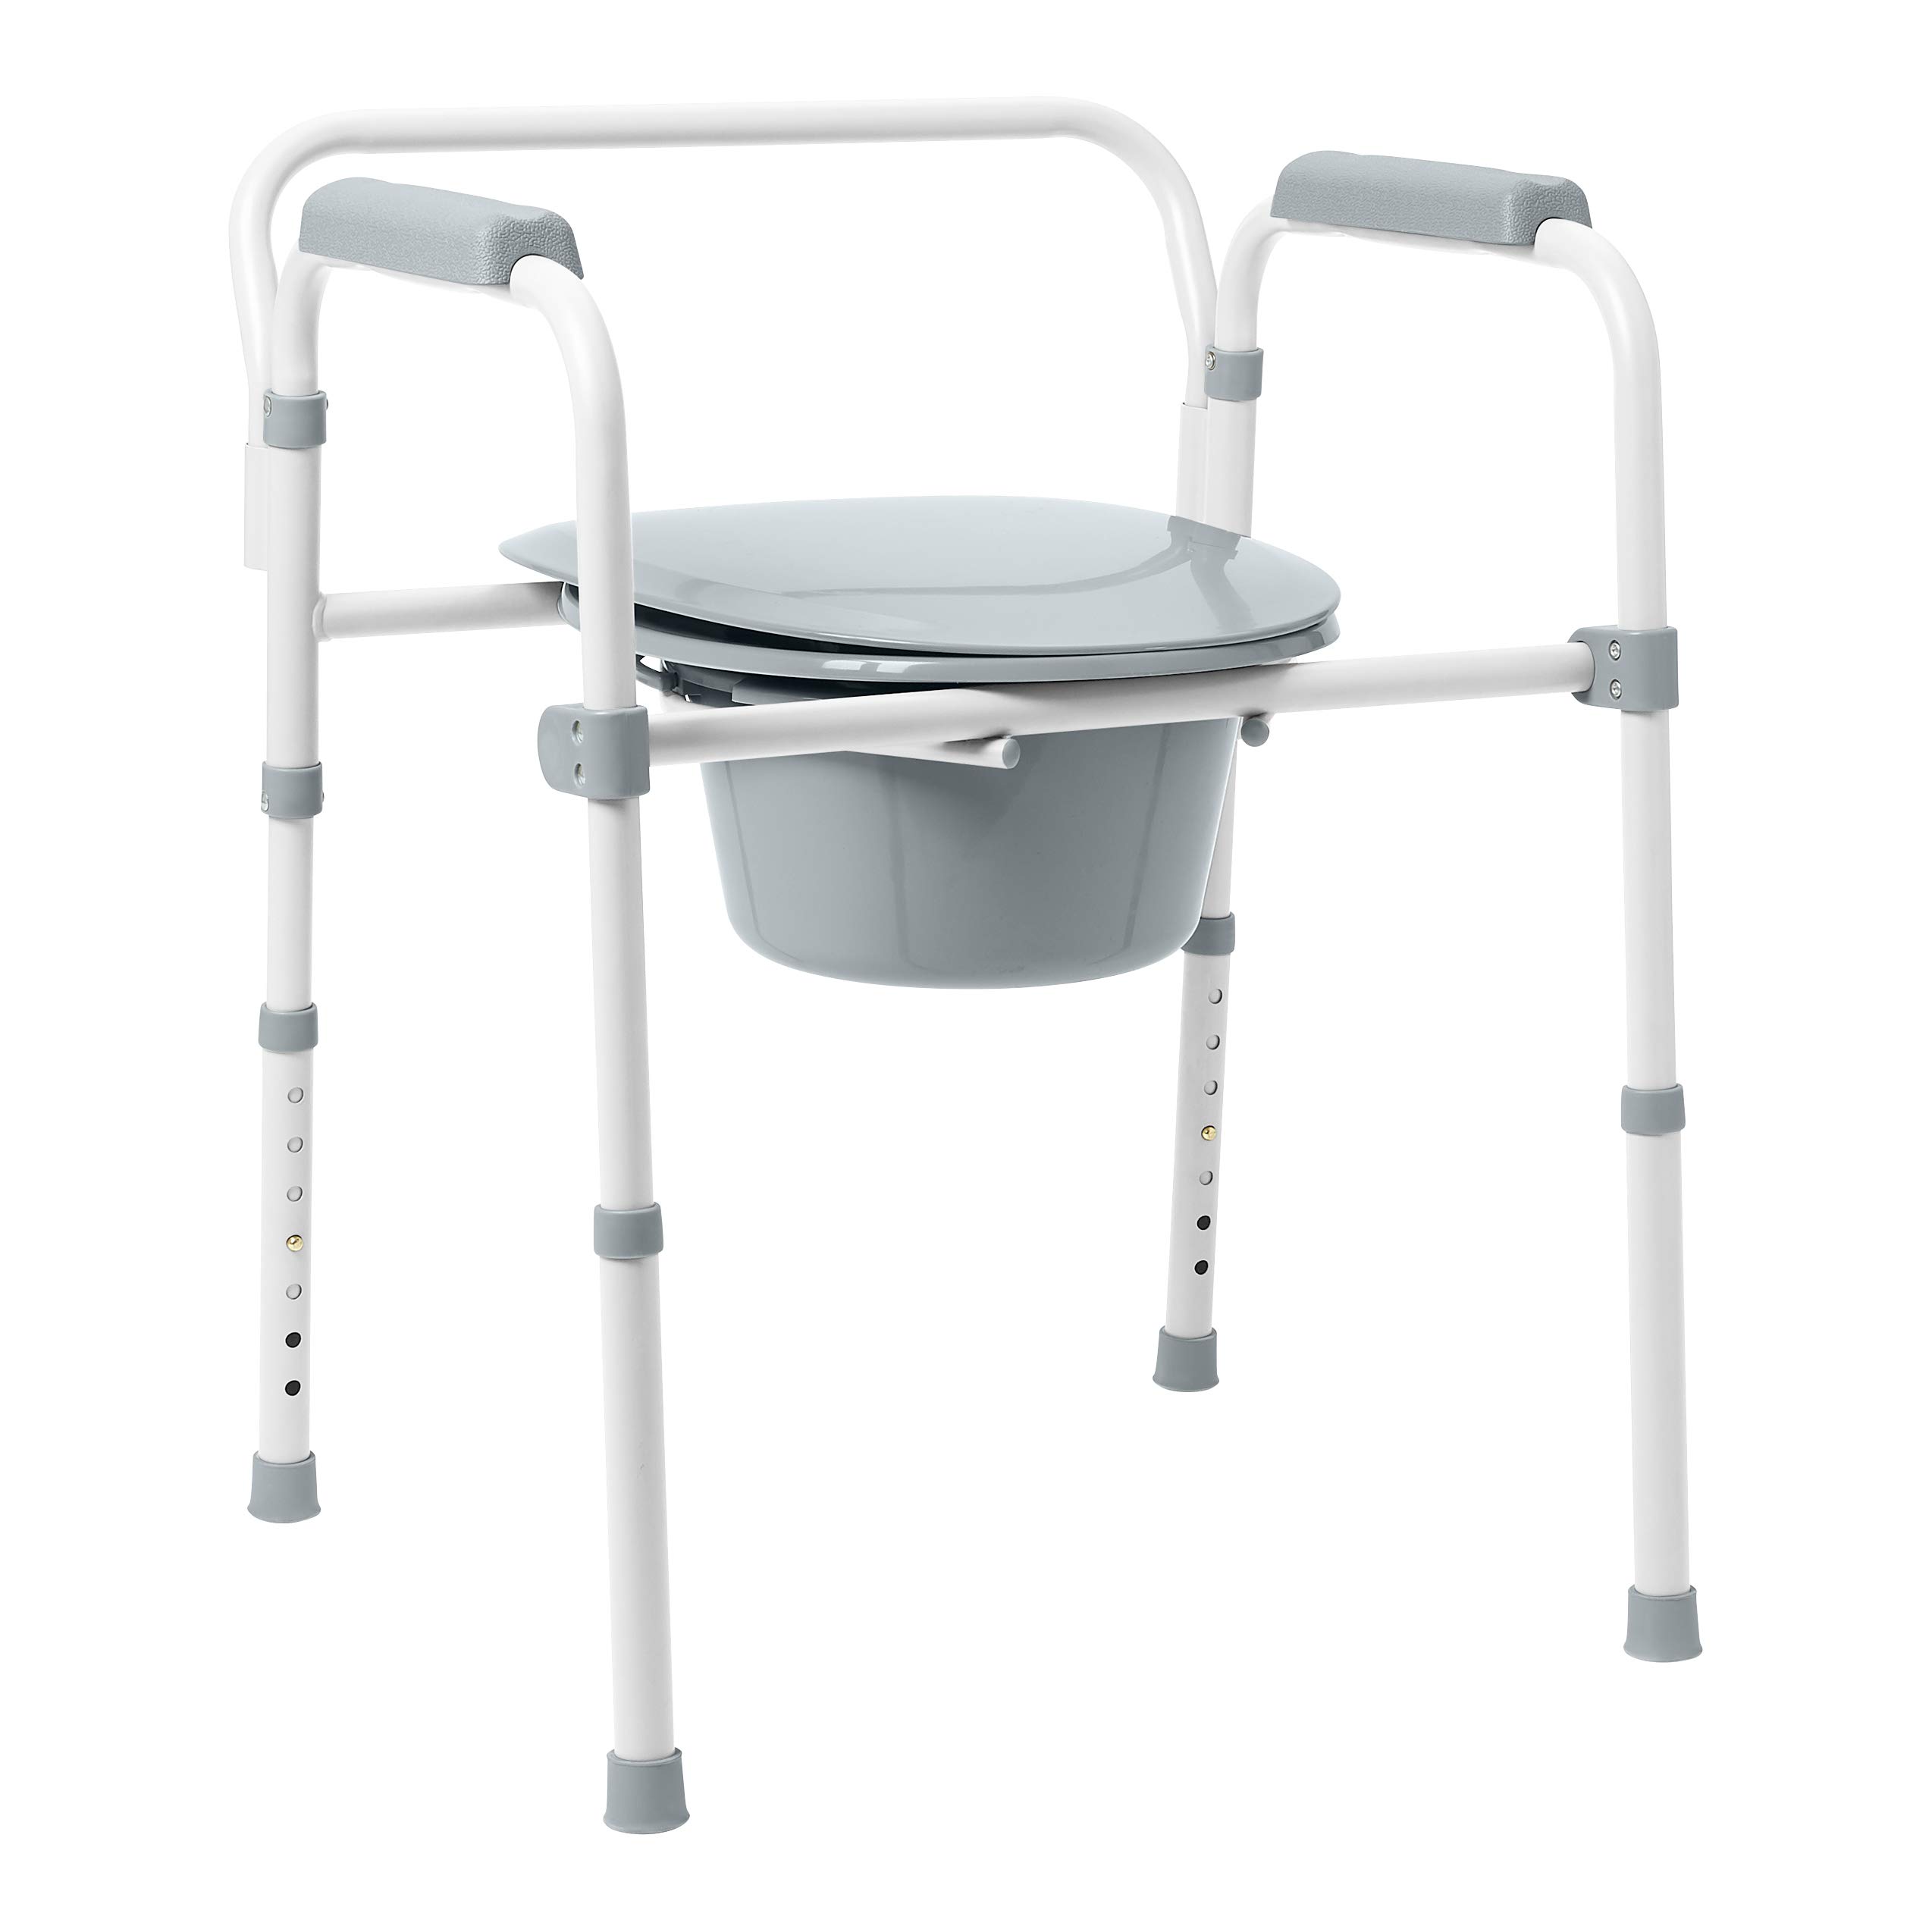 Medline 3-in-1 Steel Bedside Commode, Elongated Seat, Folding Frame, Clip on for Easy Cleaning, 350 lb Capacity